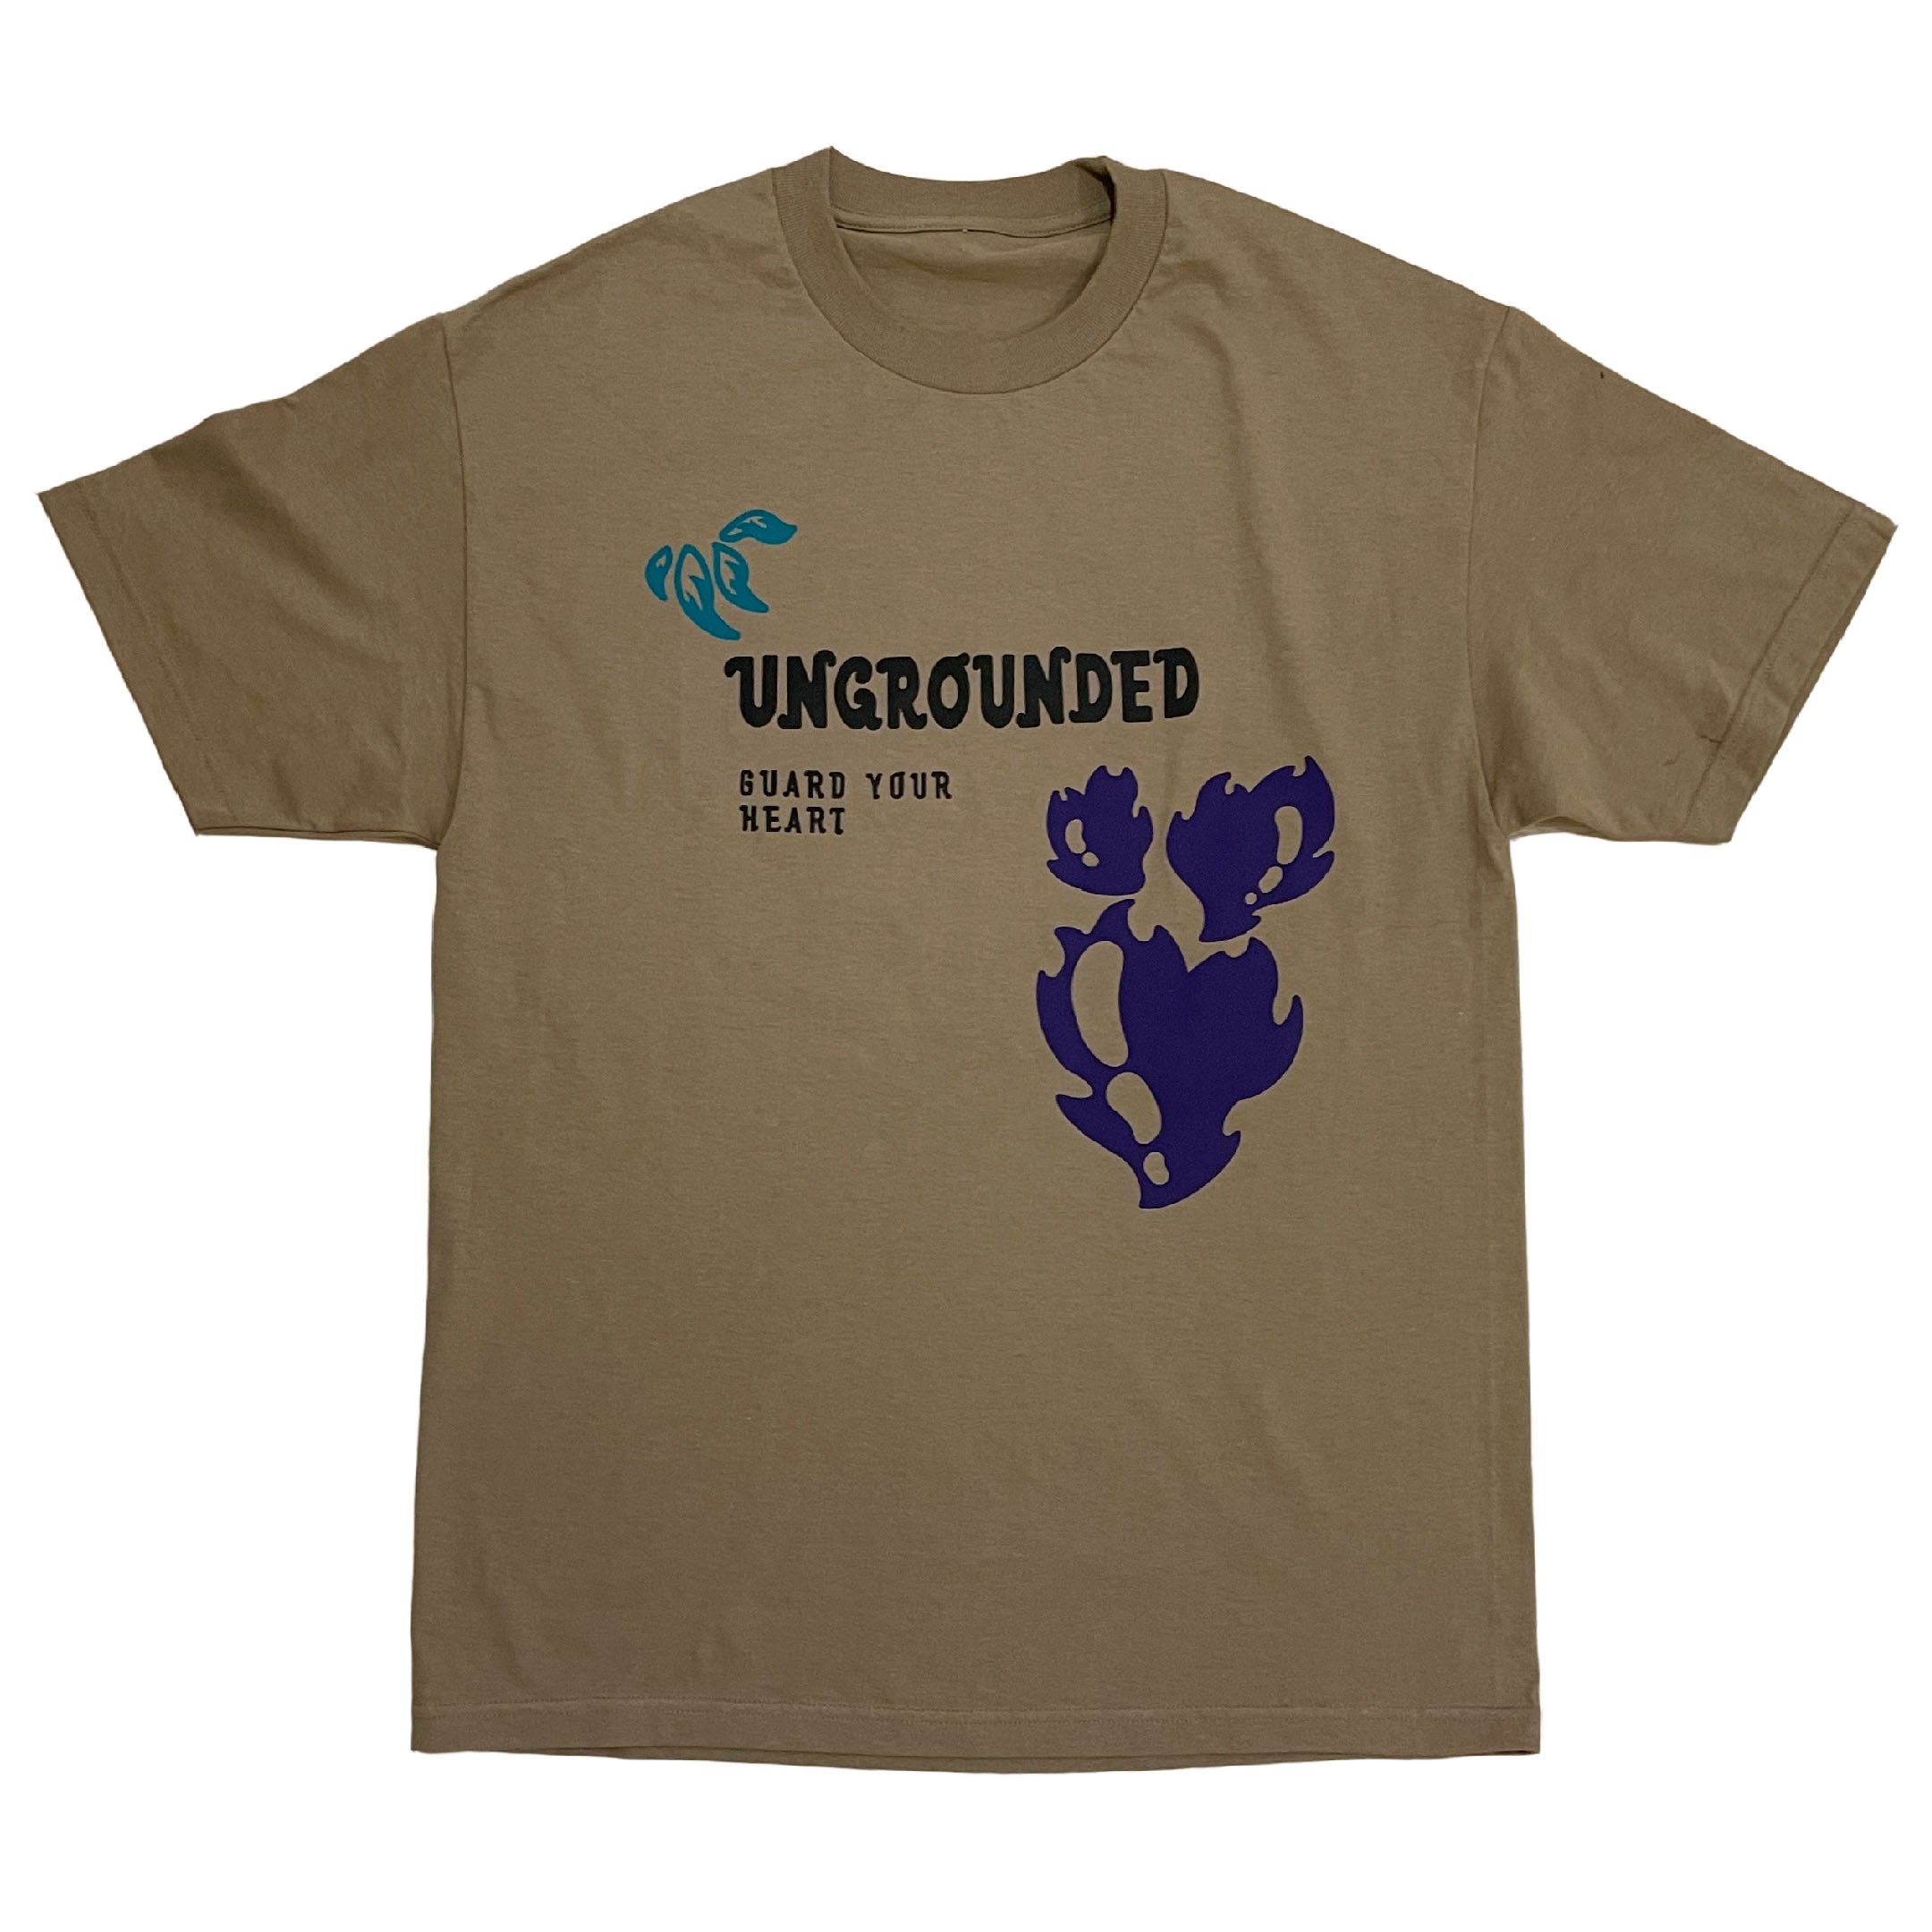 Ungrounded 'Guard Your Heart' Tee (Safari)